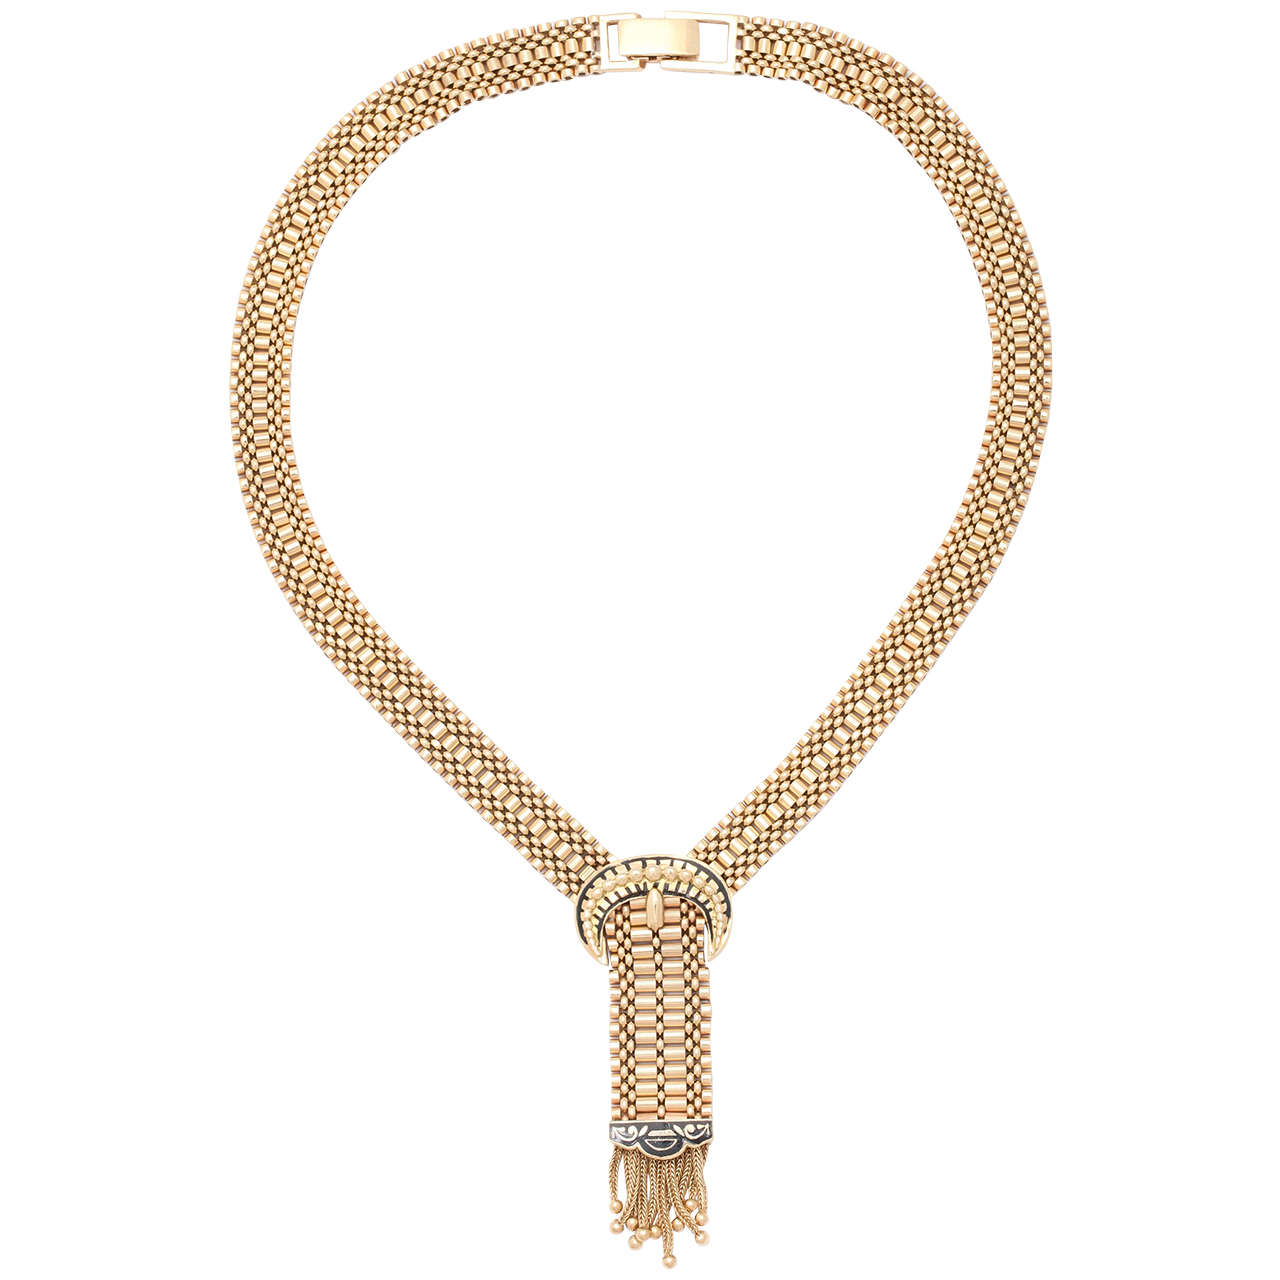 Egyptian Revival Gold Necklace